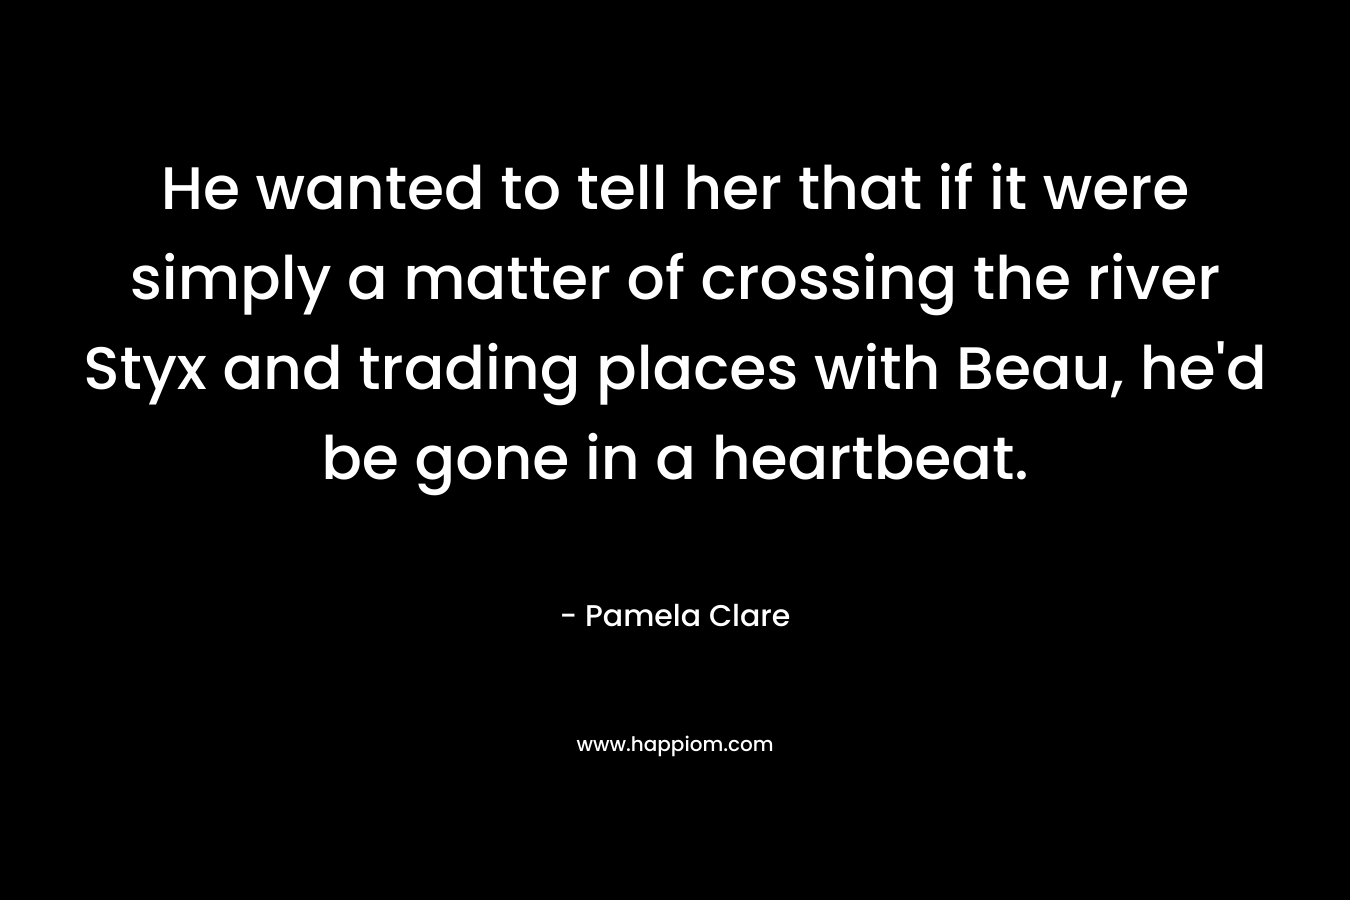 He wanted to tell her that if it were simply a matter of crossing the river Styx and trading places with Beau, he’d be gone in a heartbeat. – Pamela Clare